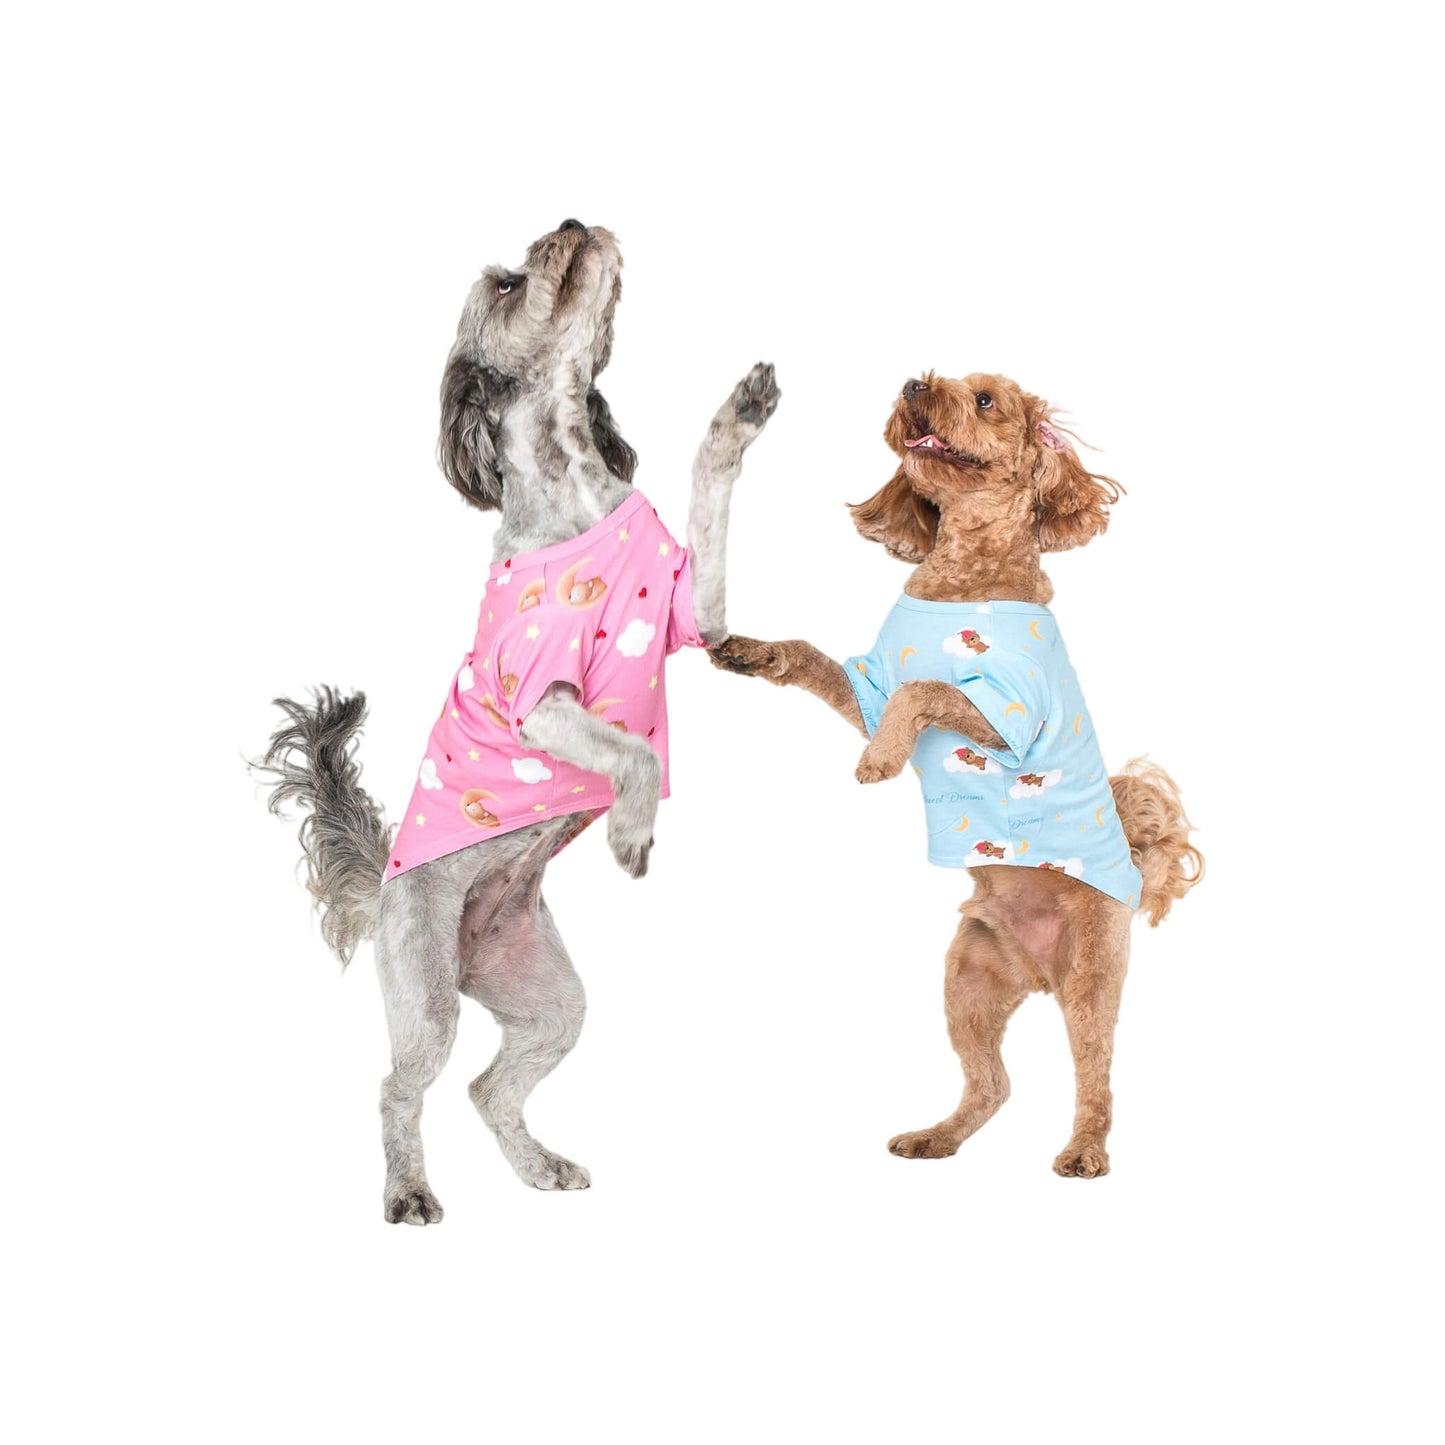 Two cavoodles jumping into the air. They are wearing Vibrant Hounds Lil dreamer blue and pink dog sleep range.